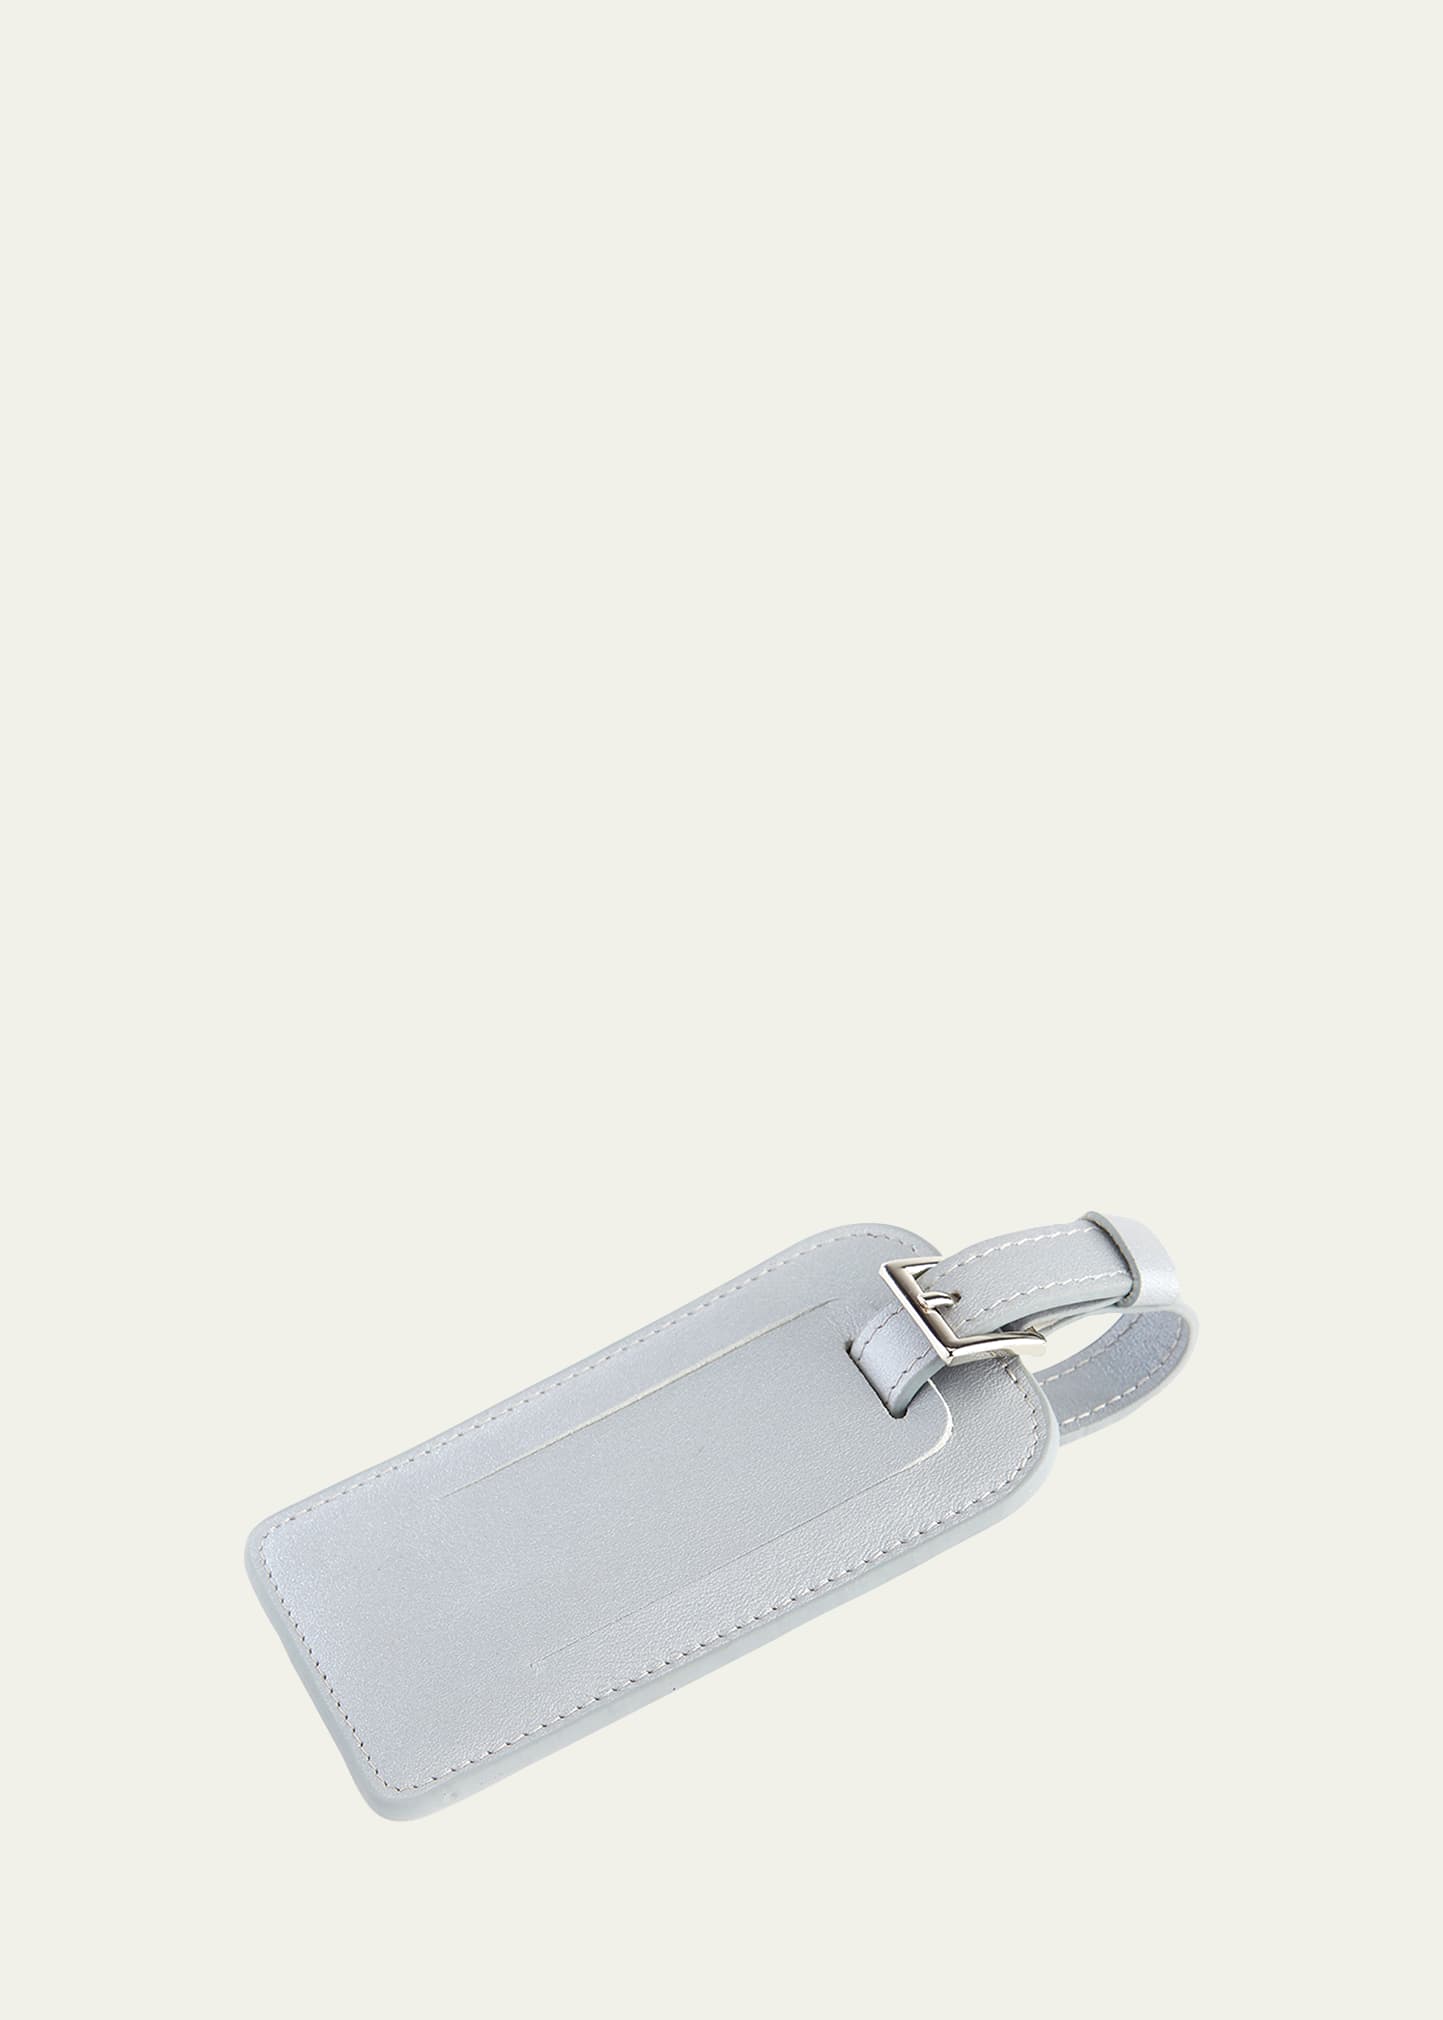 Leather Luggage Tag with Silver Hardware